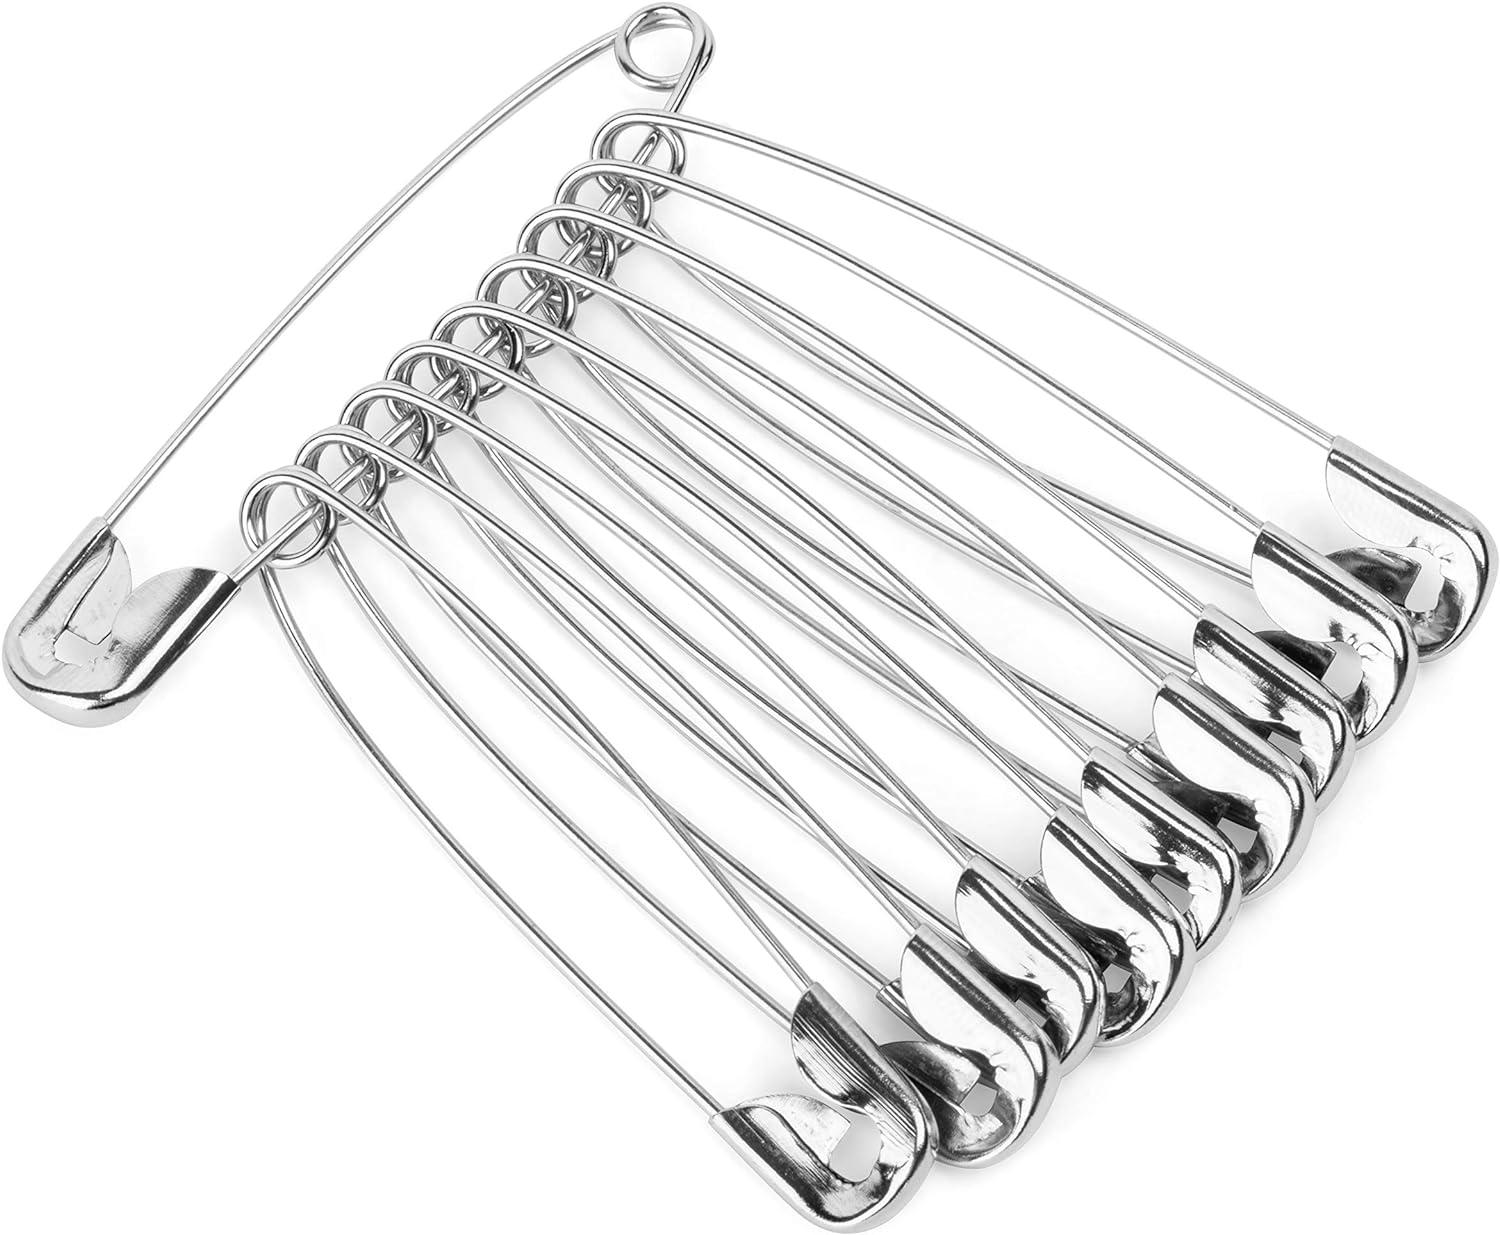 Mr. Pen- Safety Pins, 1.1 inch, Pack of 200, Safety Pins Bulk